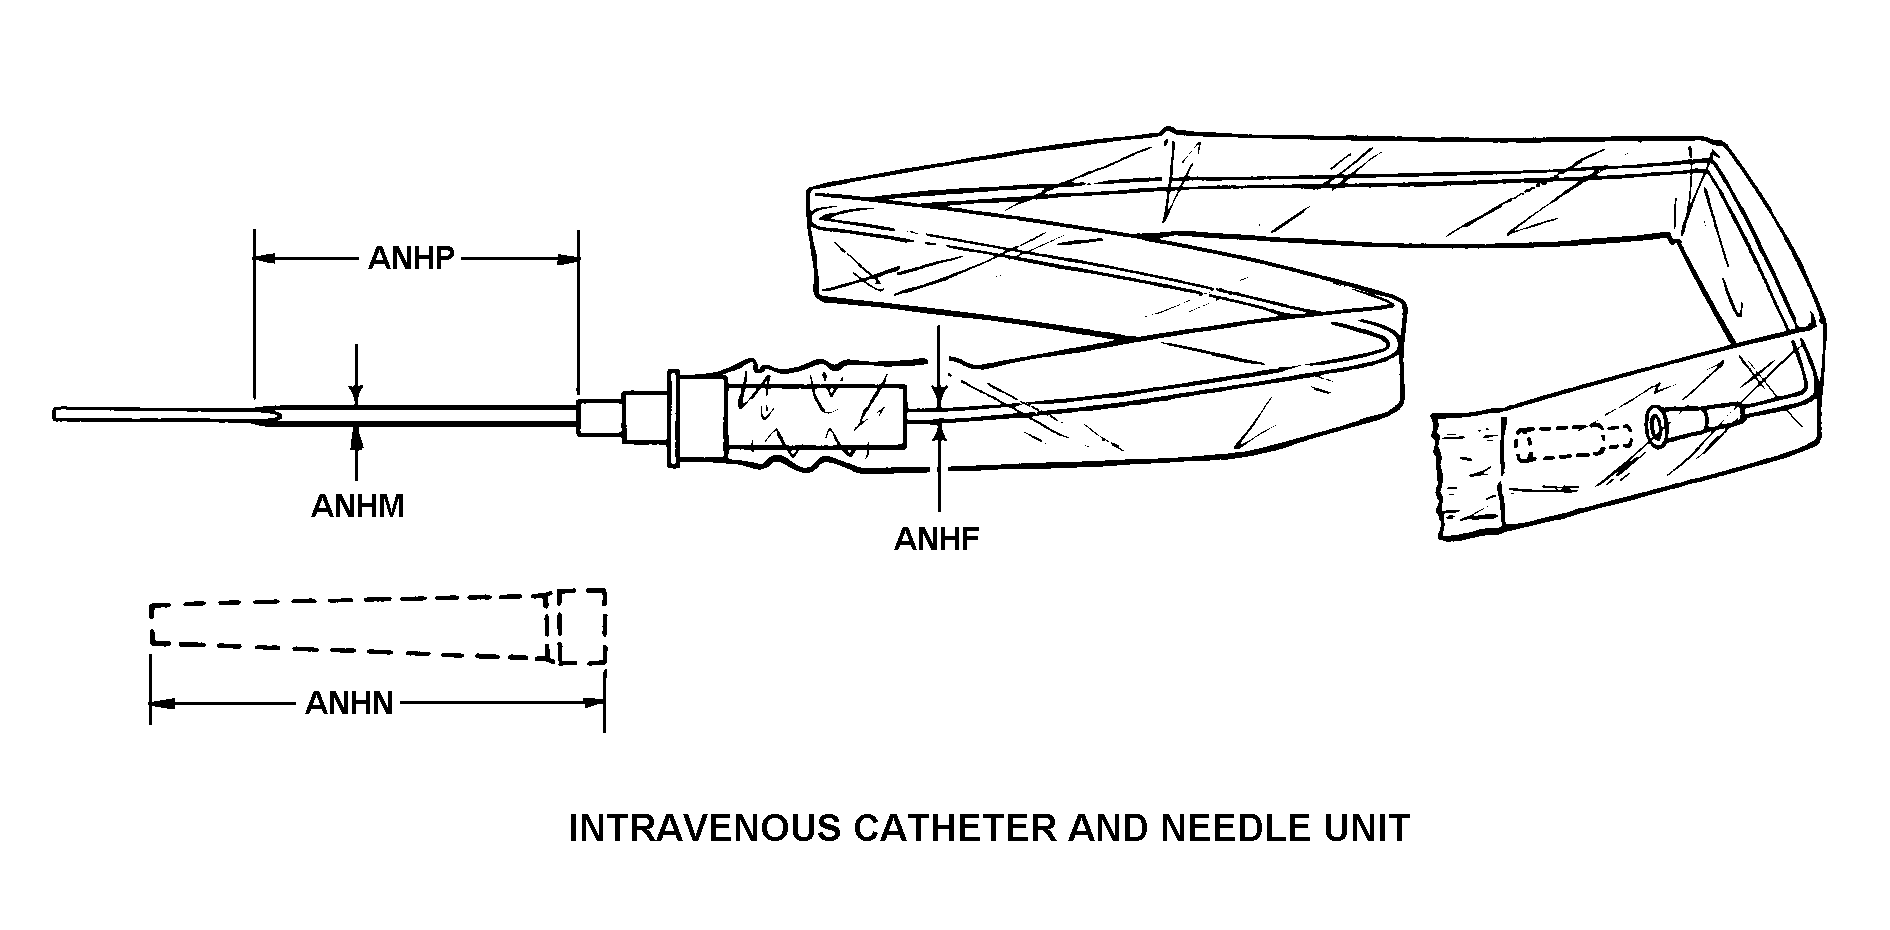 INTRAVENOUS CATHETER AND NEEDLE UNIT style nsn 6515-00-455-6775